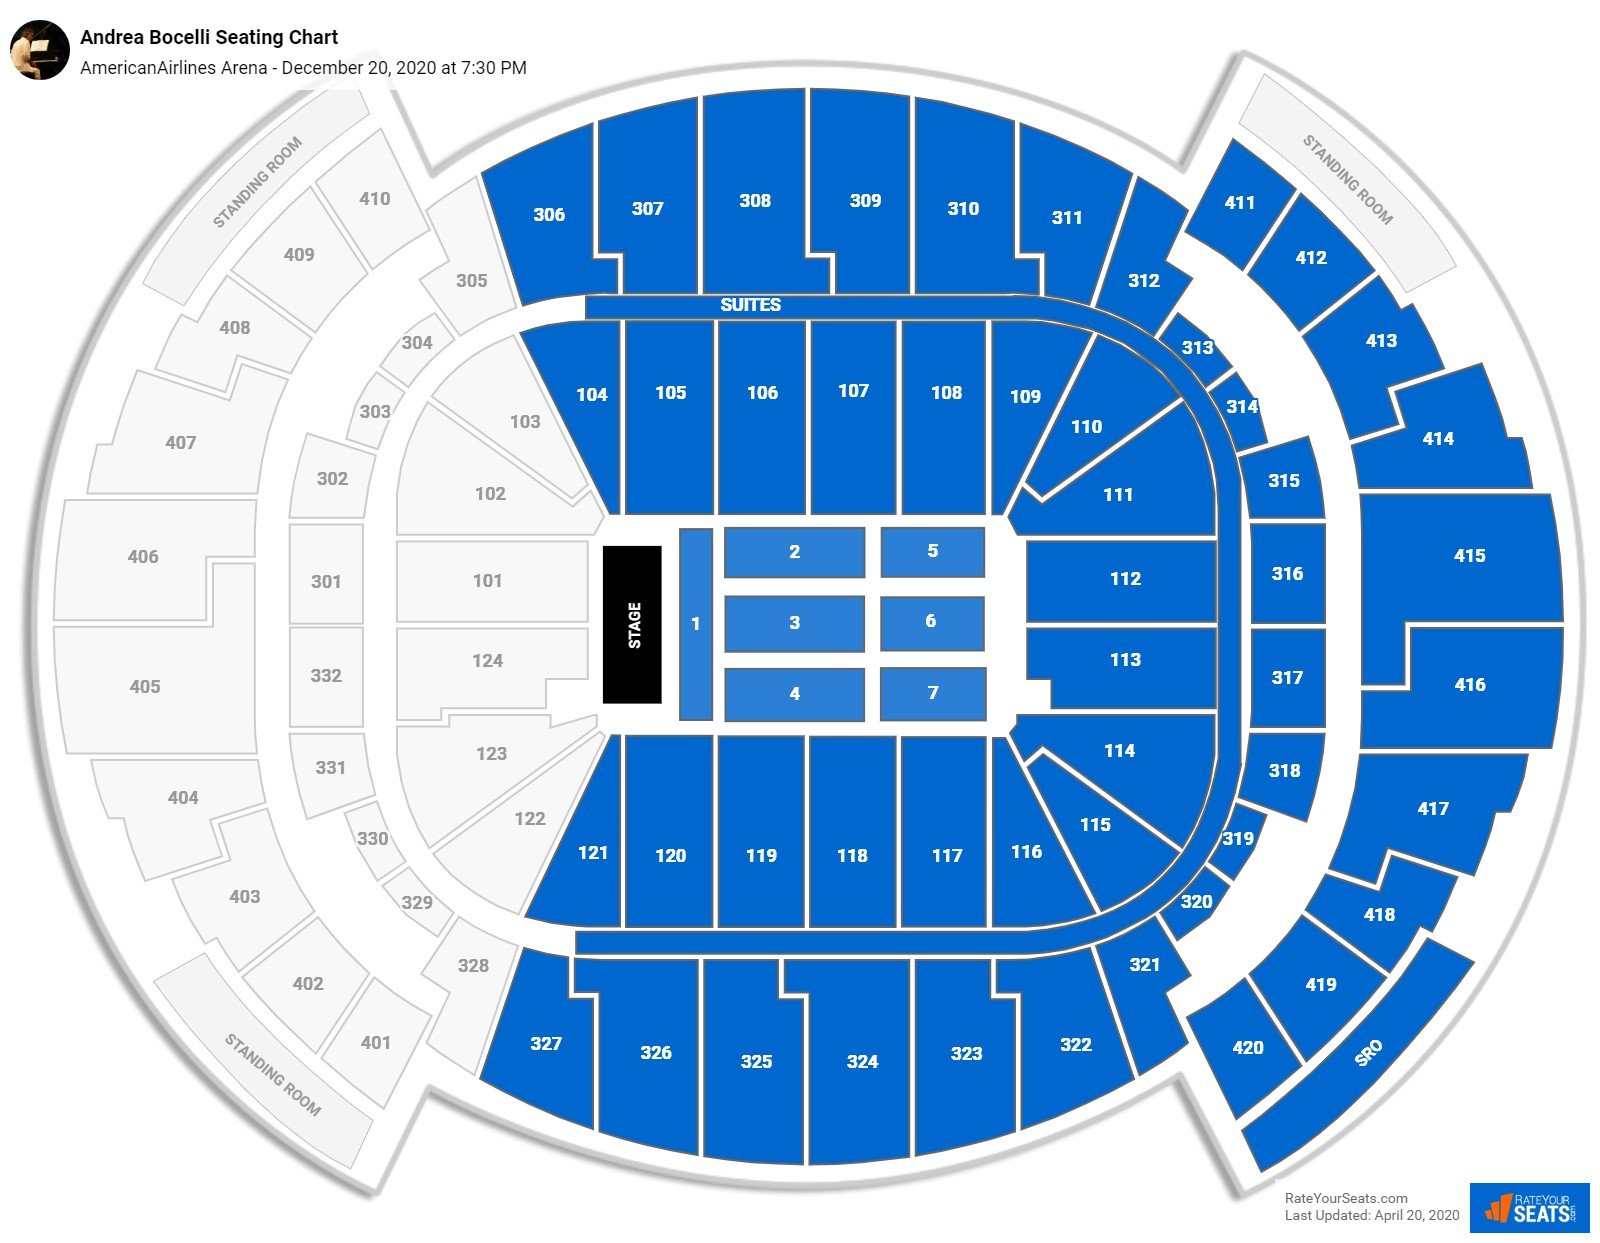 AmericanAirlines Arena Seating Charts for Concerts